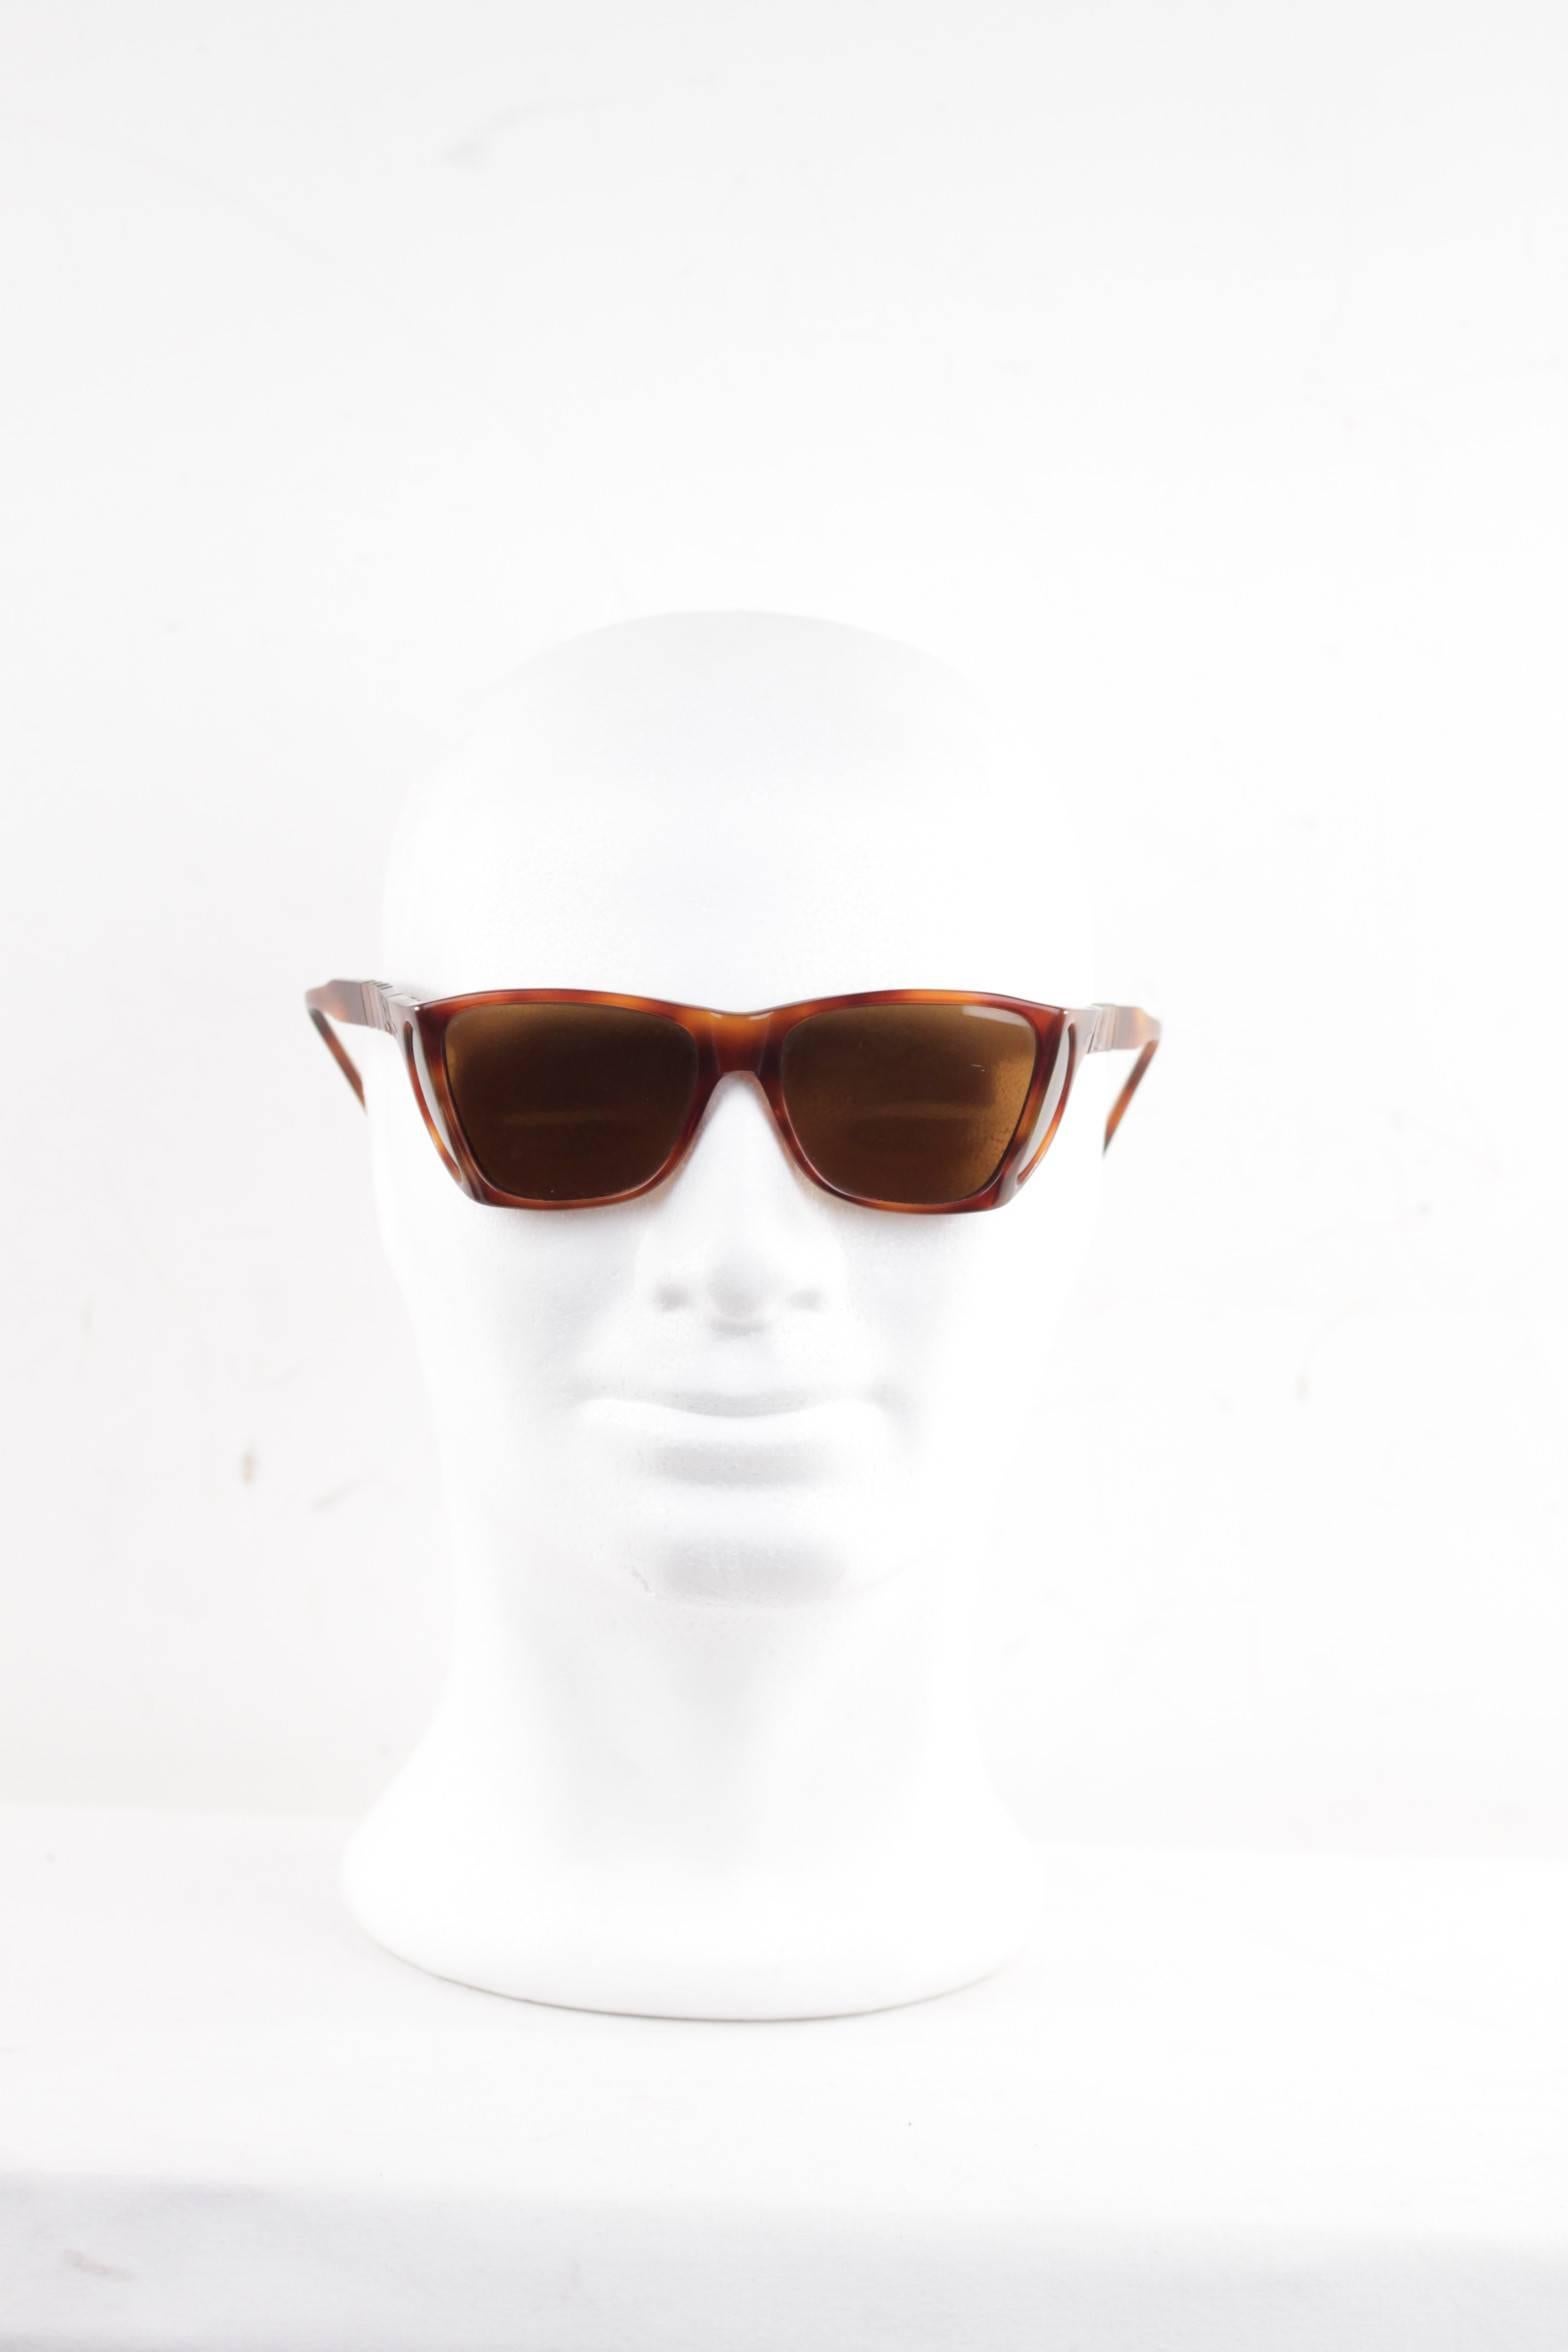 persol sunglasses with side shields